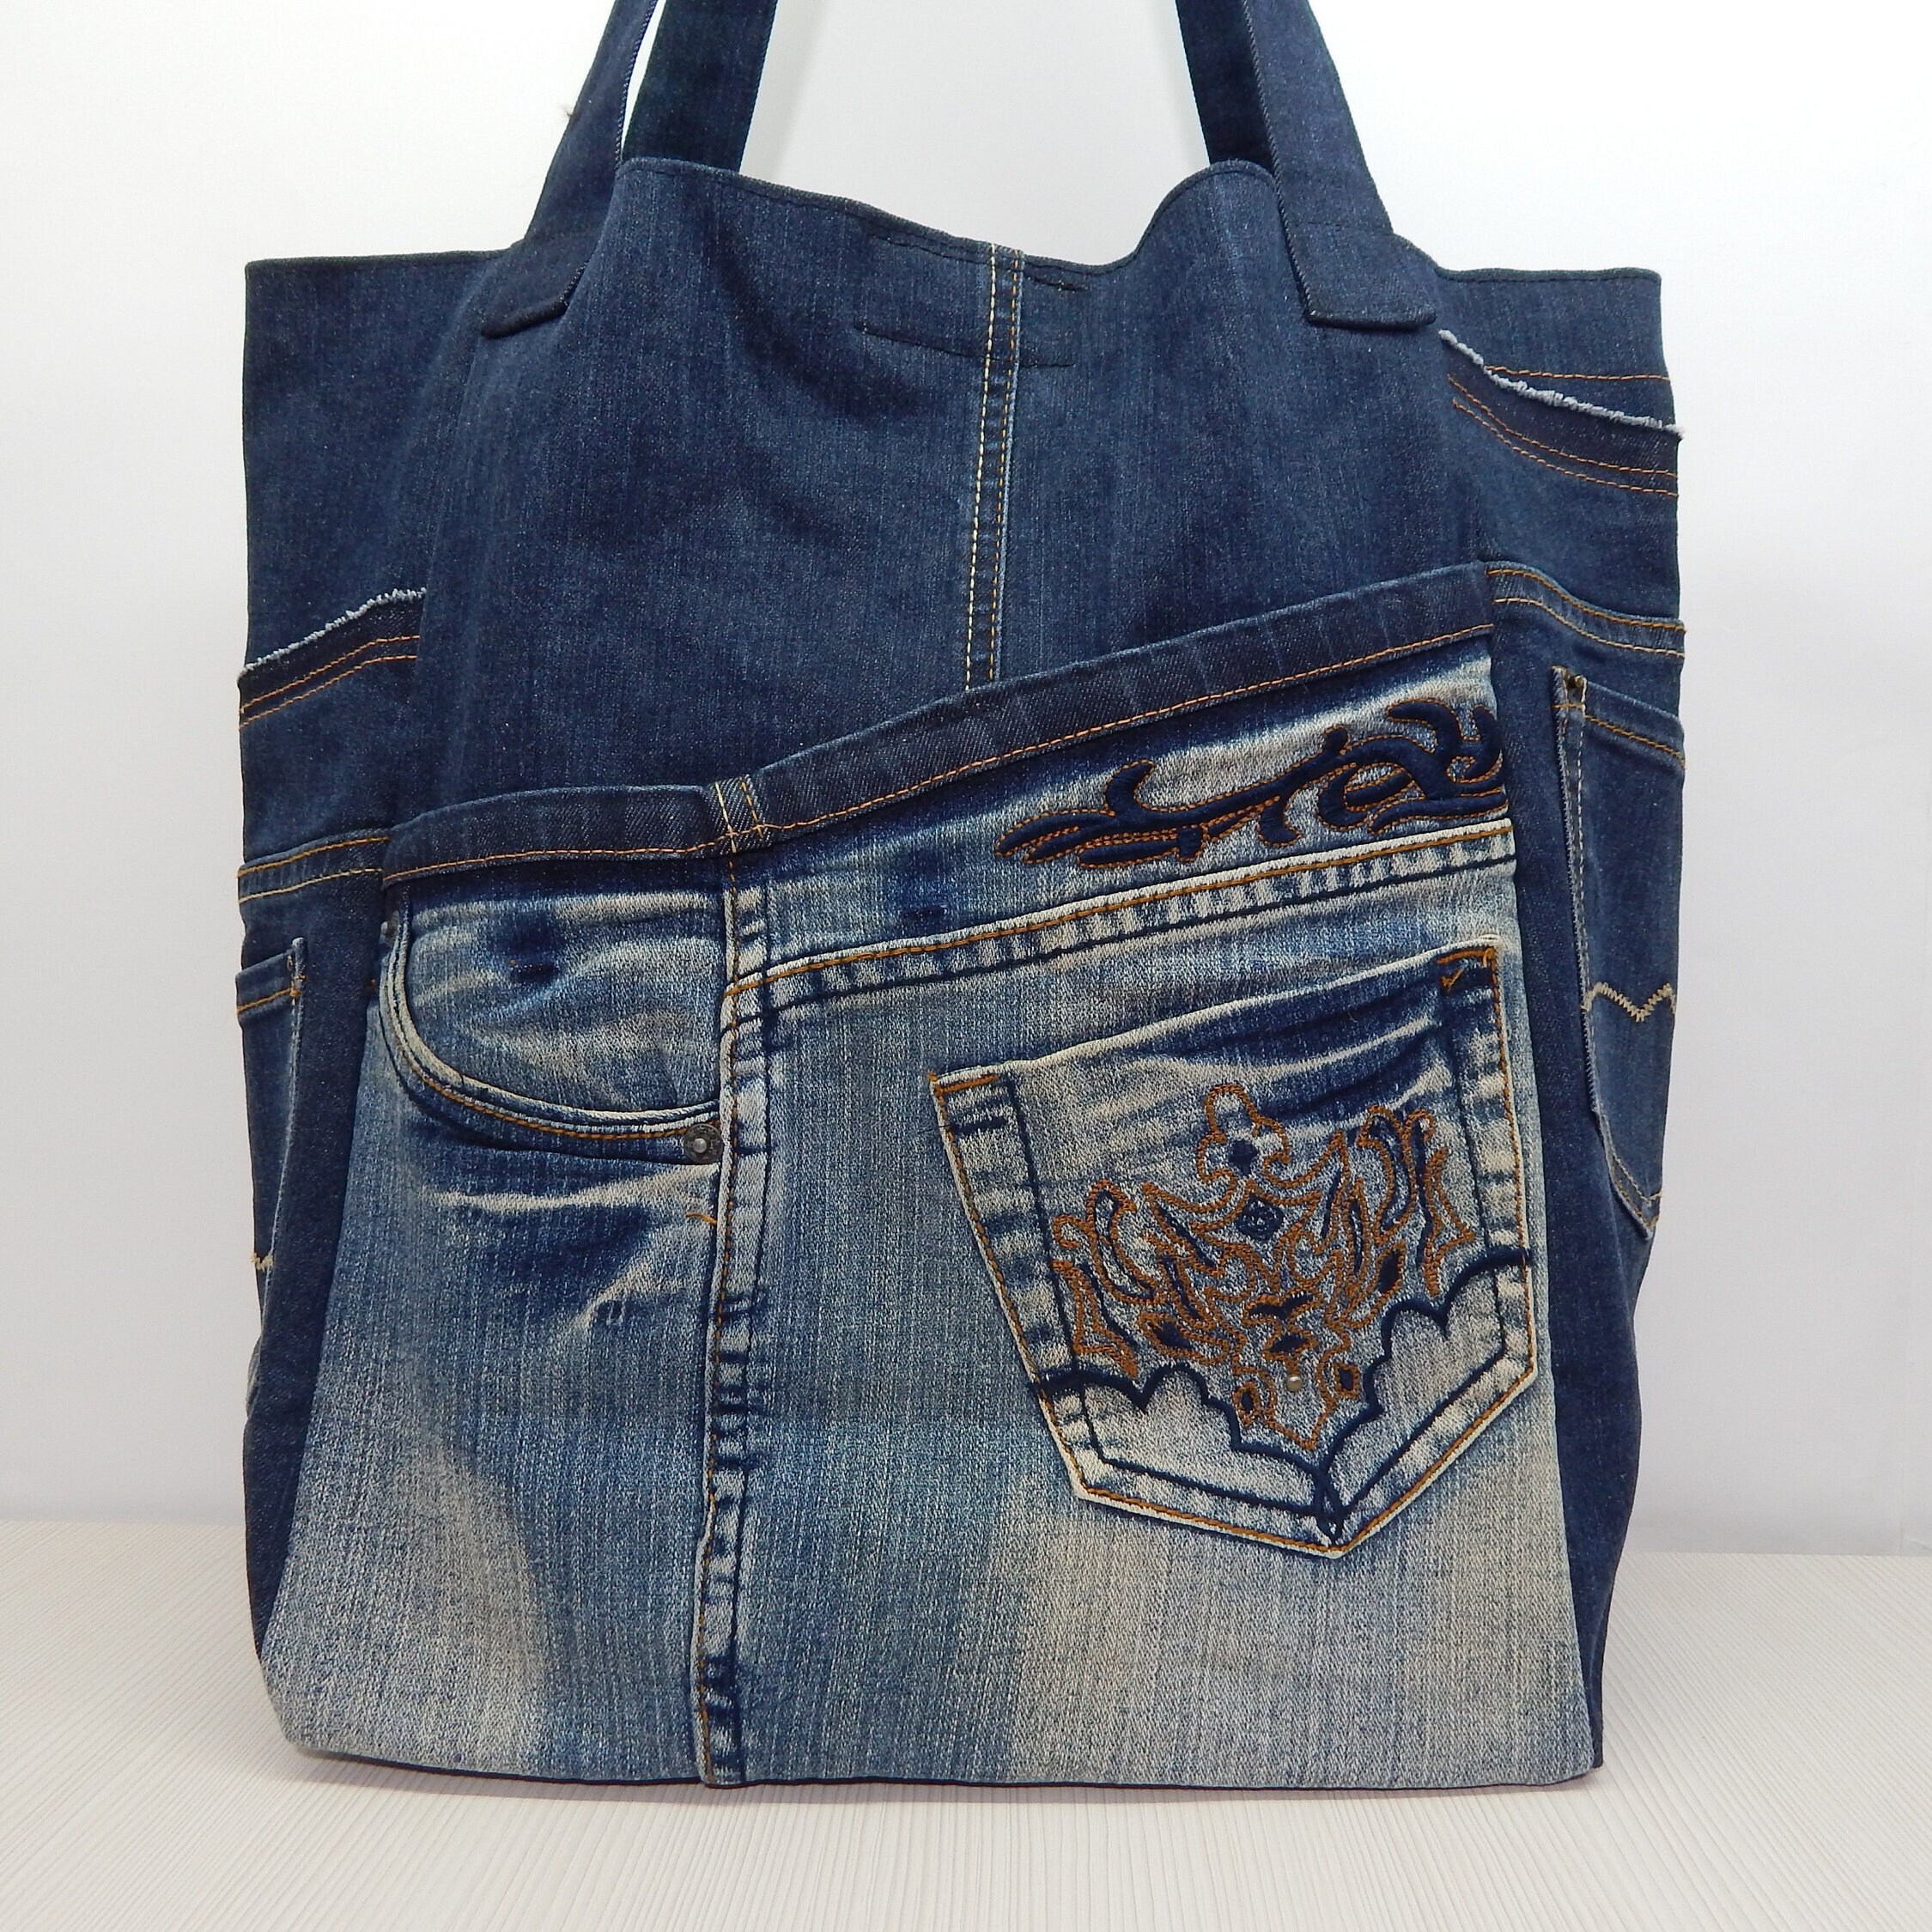 Upcycled Denim Tote Bag With Pockets Large Shopping Bag Tote 